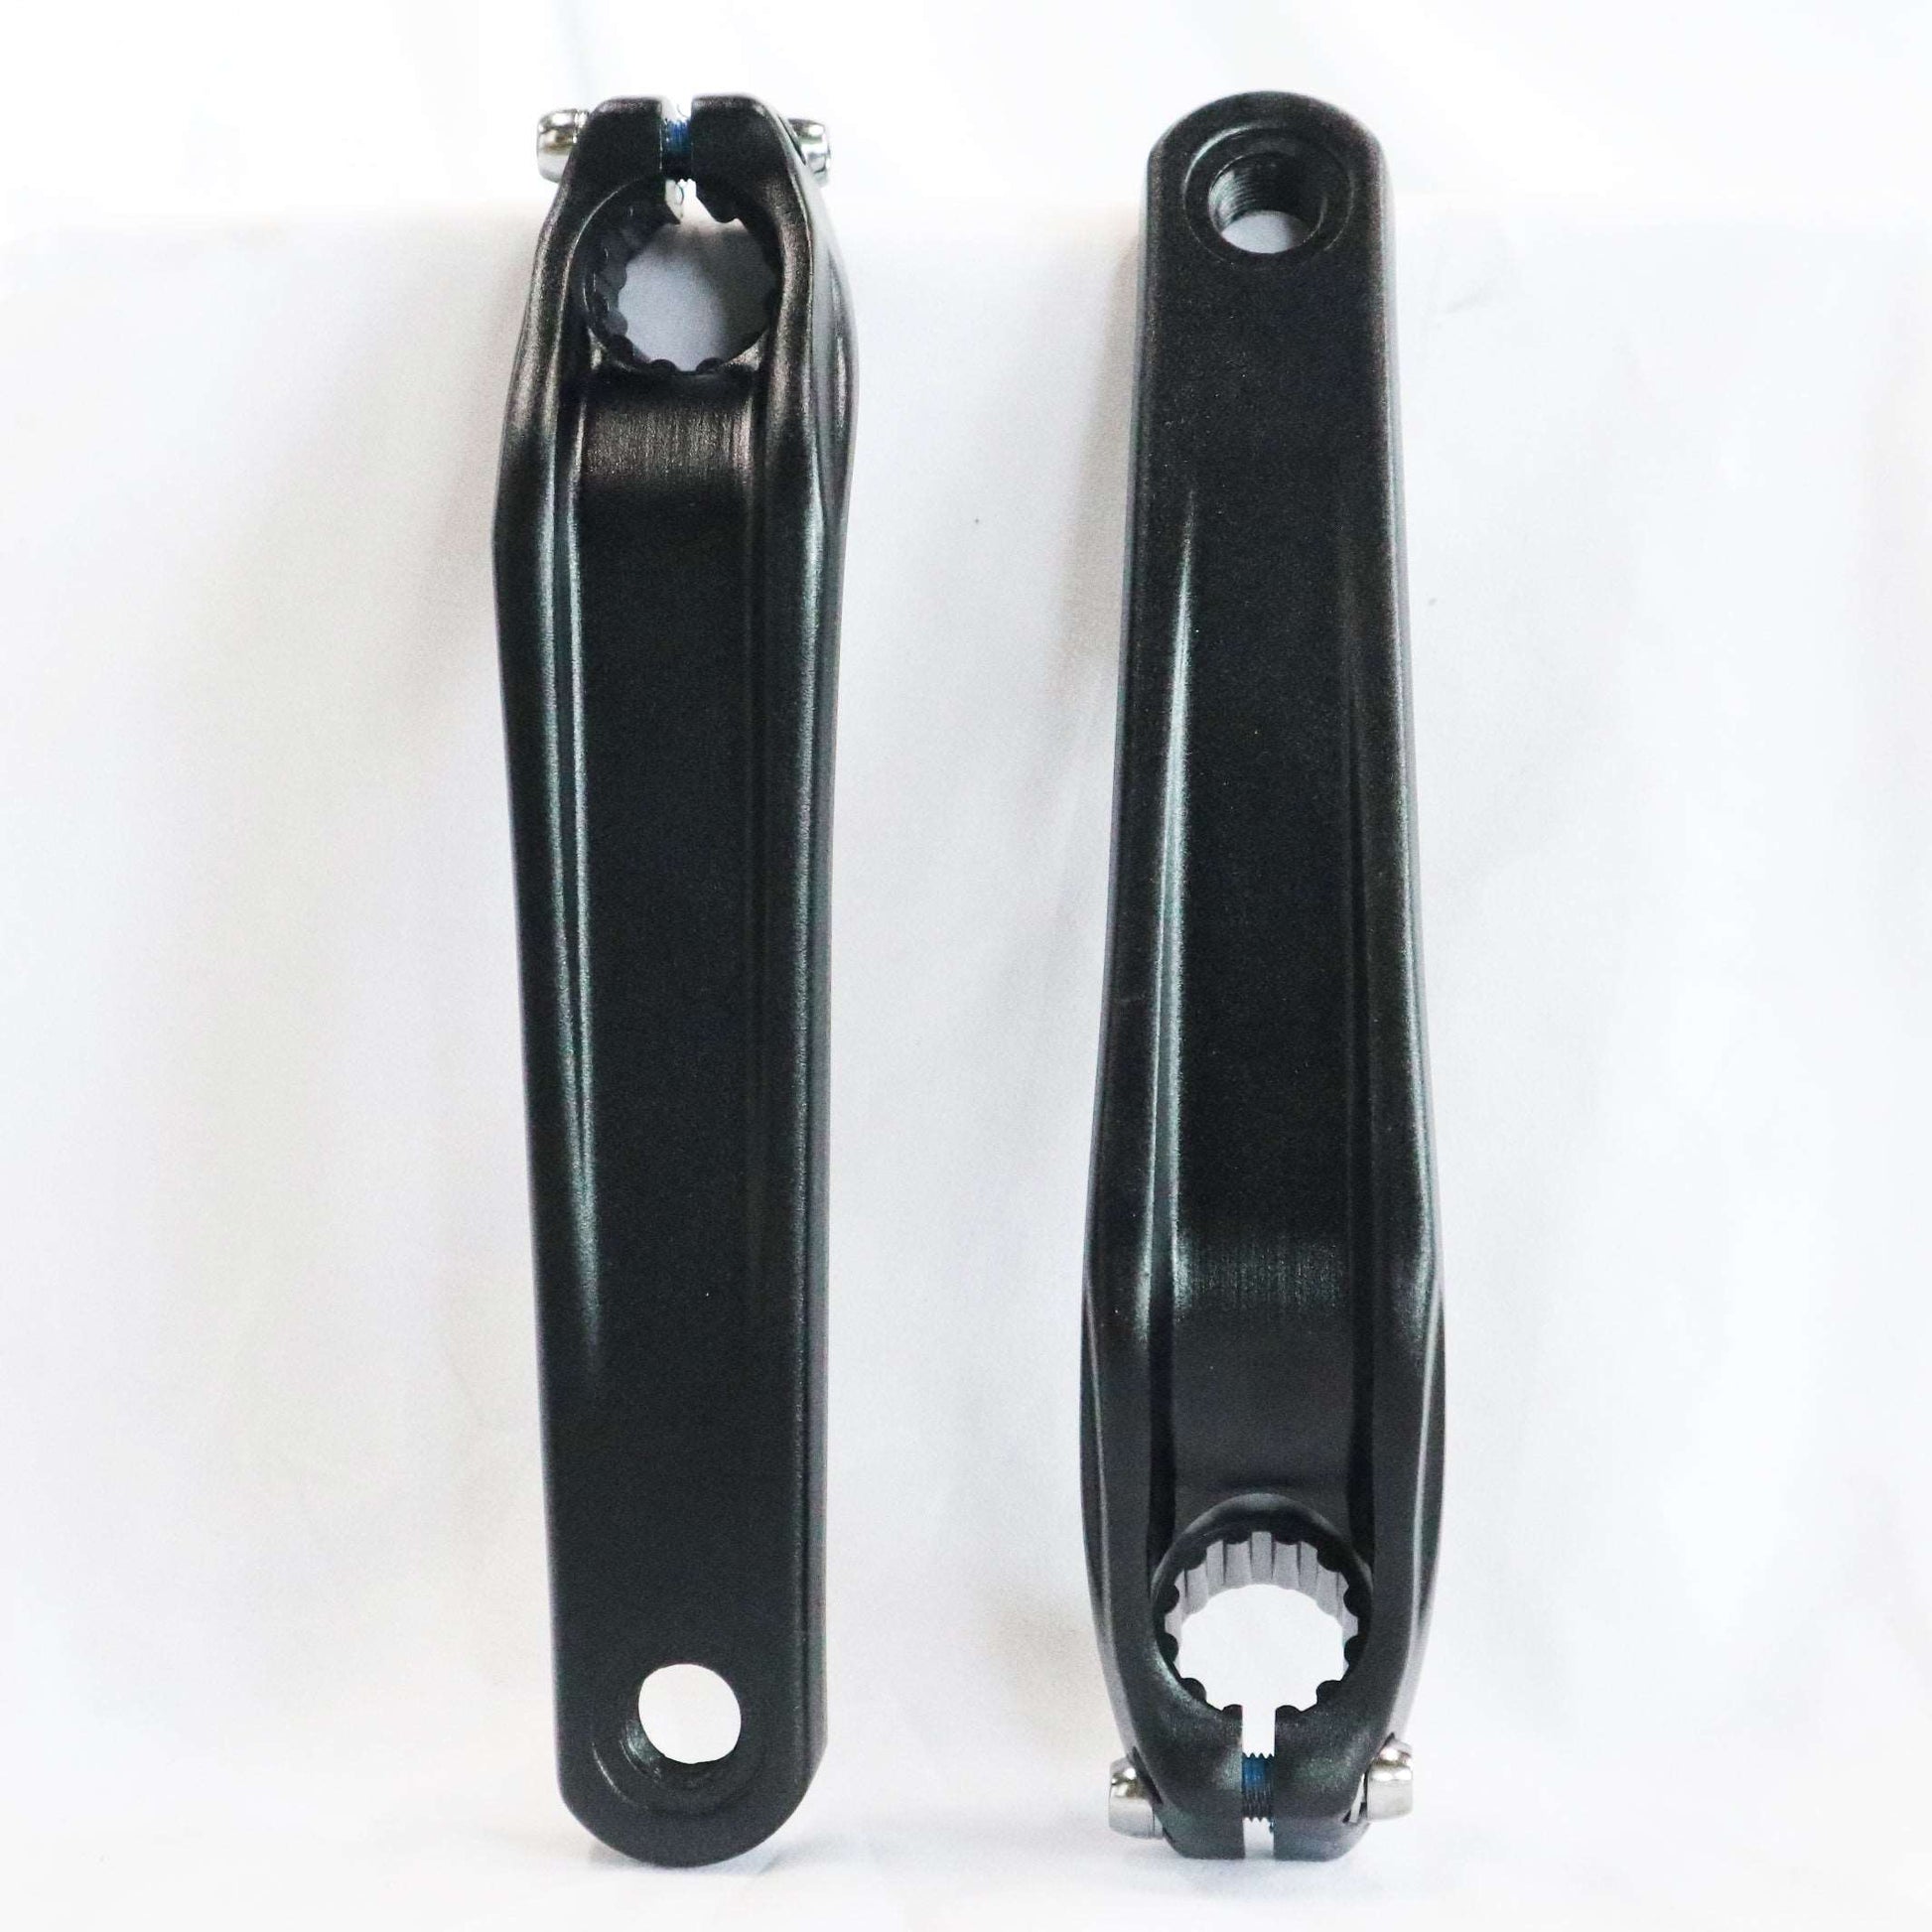 170mm crank arms for fat Ebike (Bafang M500/M510/M560/M600)